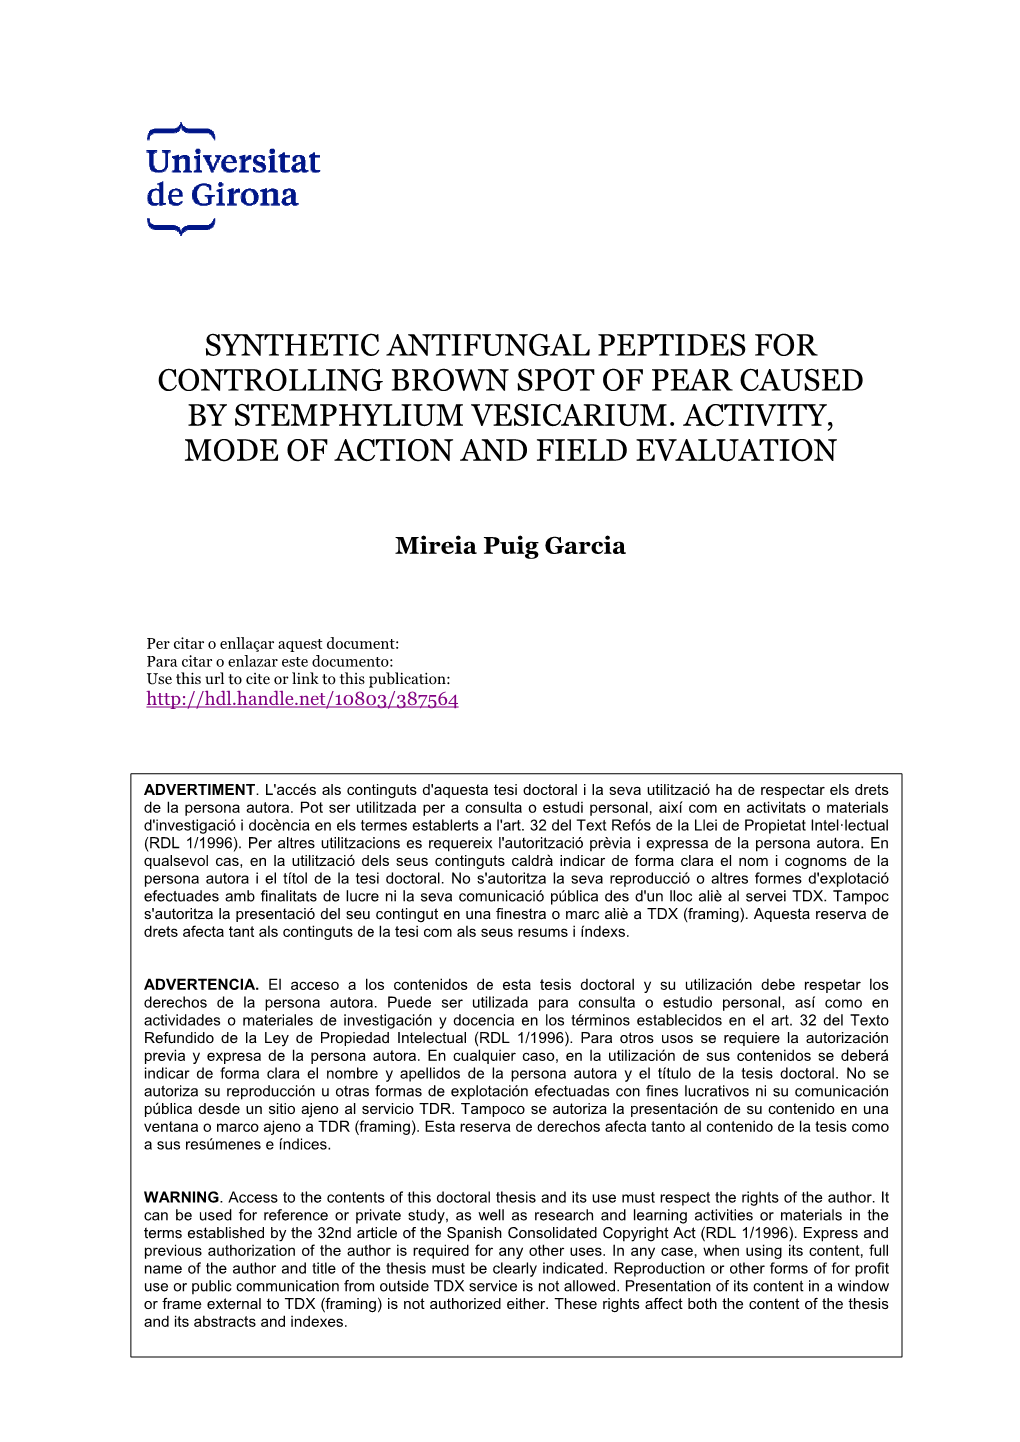 Synthetic Antifungal Peptides for Controlling Brown Spot of Pear Caused by Stemphylium Vesicarium